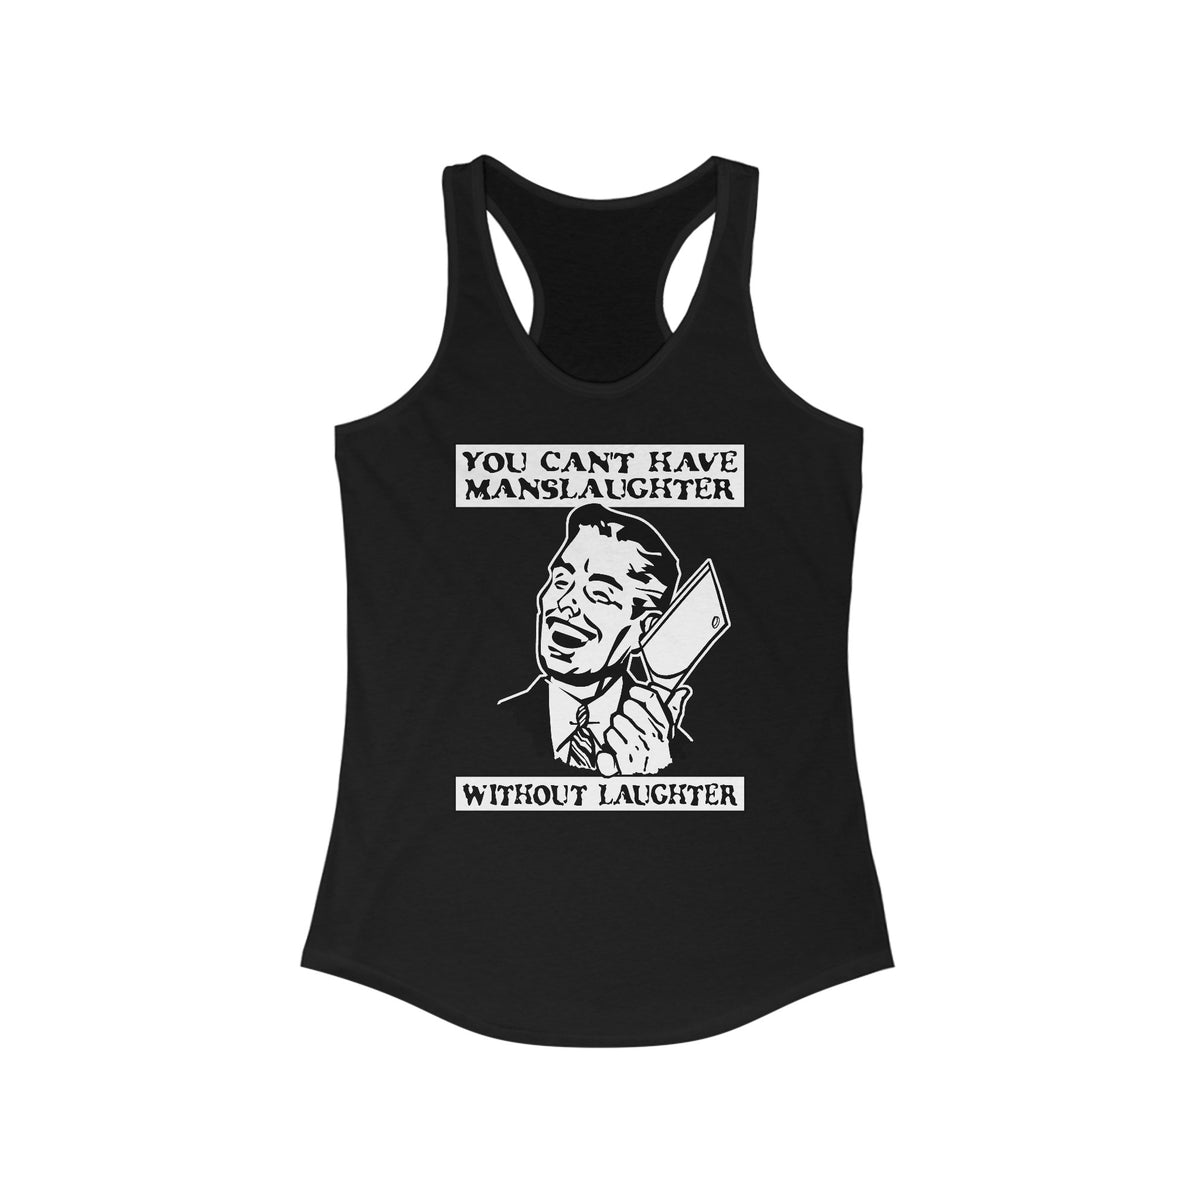 You Cant Have Manslaughter Without Laughter  -Women’s Racerback Tank